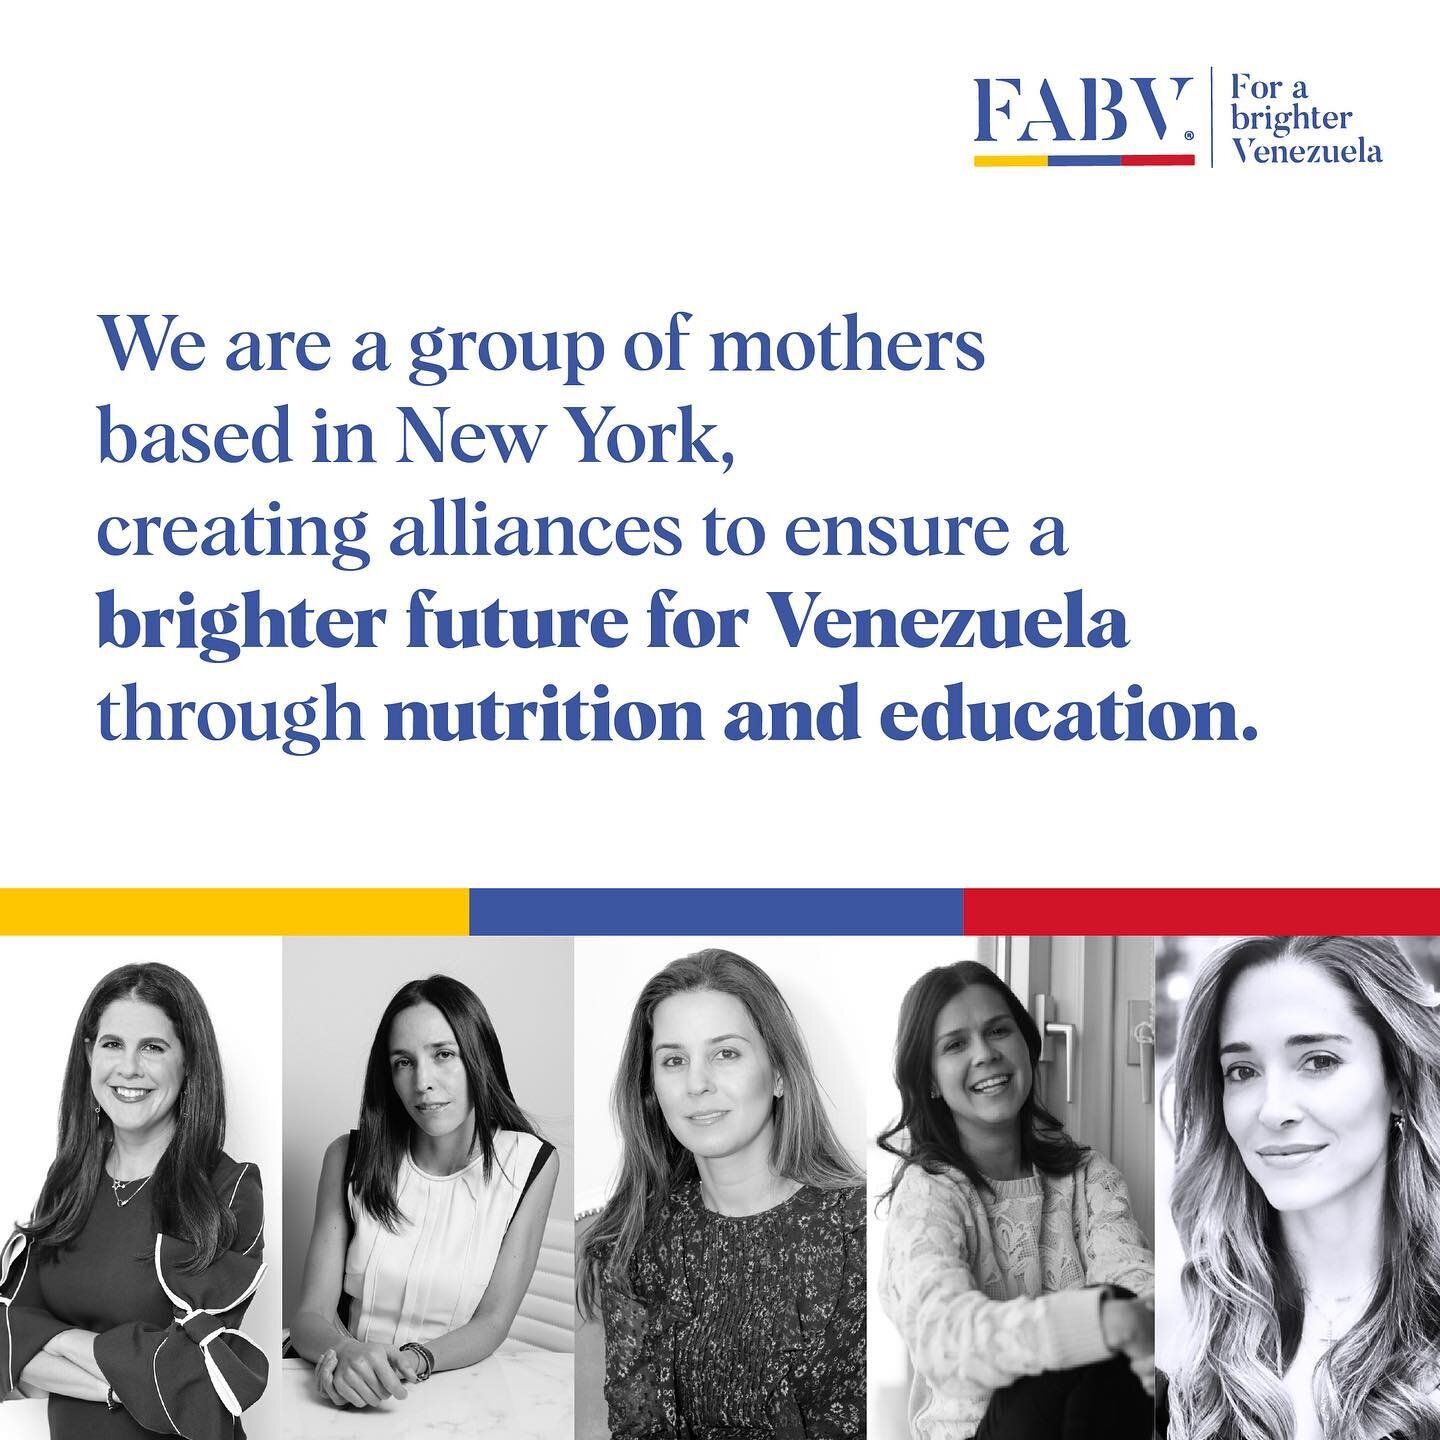 For a Brighter Venezuela is an organization that supports children&rsquo;s education and nutrition in Venezuela.

Based in New York, but with strong ties to this country, FABV was founded by a group of 5 mothers committed to seeking a better future f